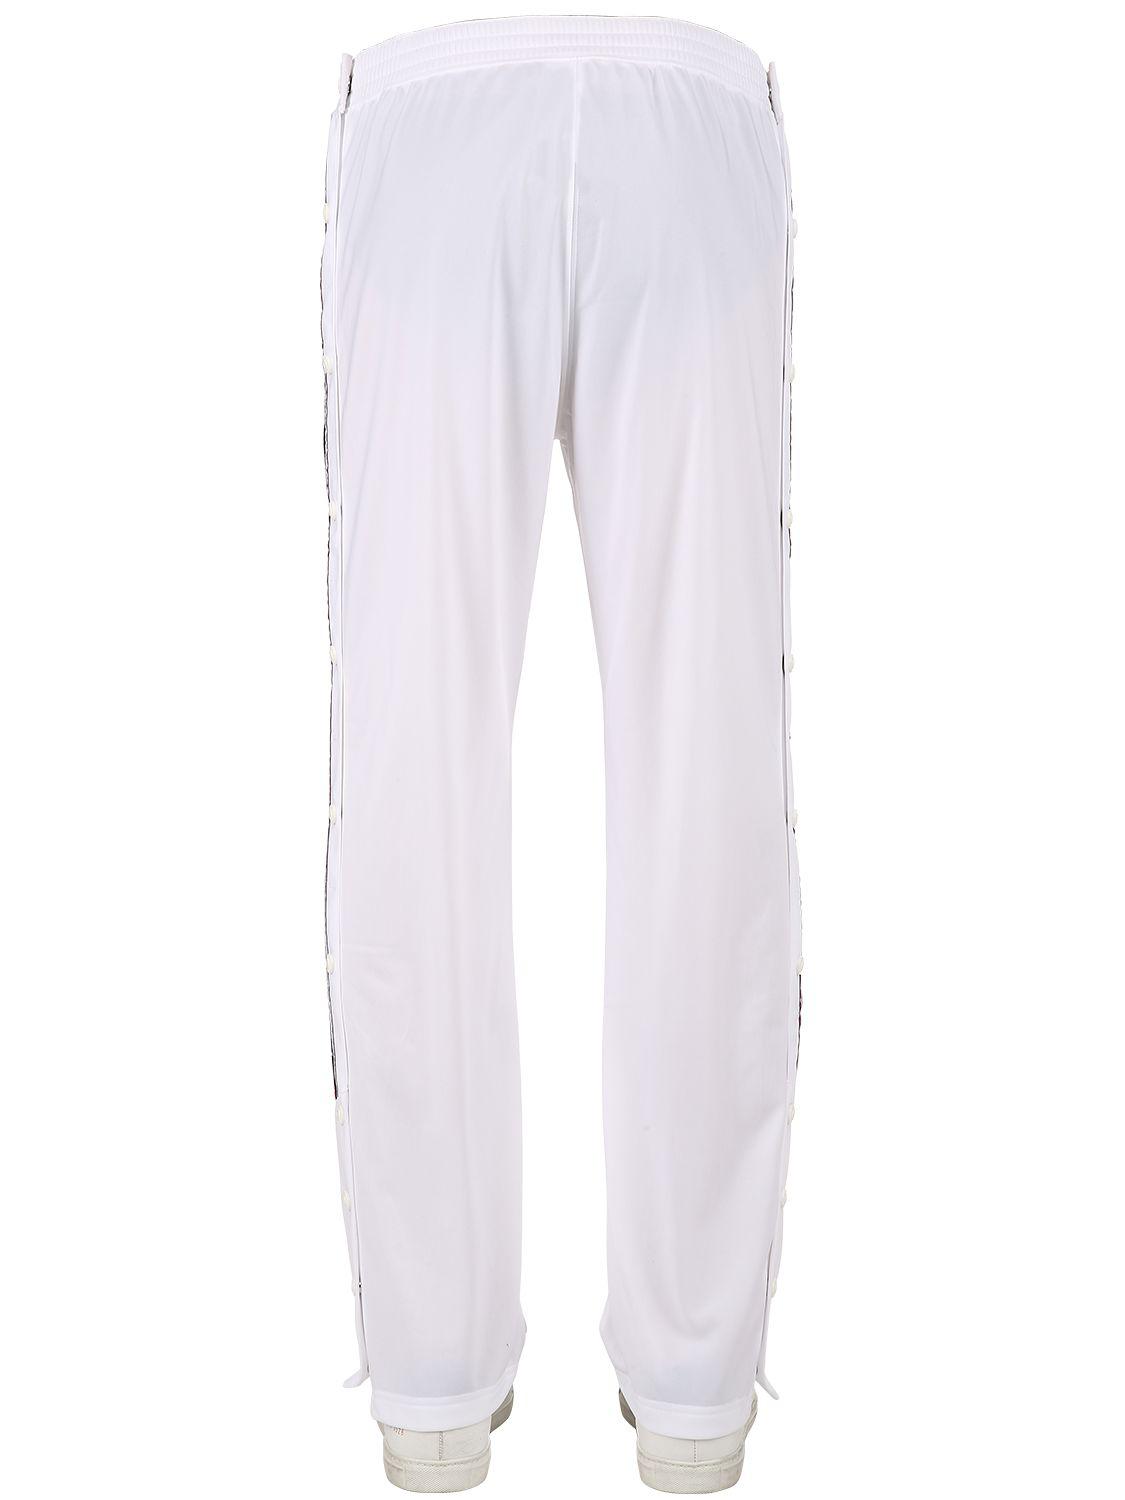 Champion Synthetic Nylon Tear Away Track Pants in White for Men - Lyst